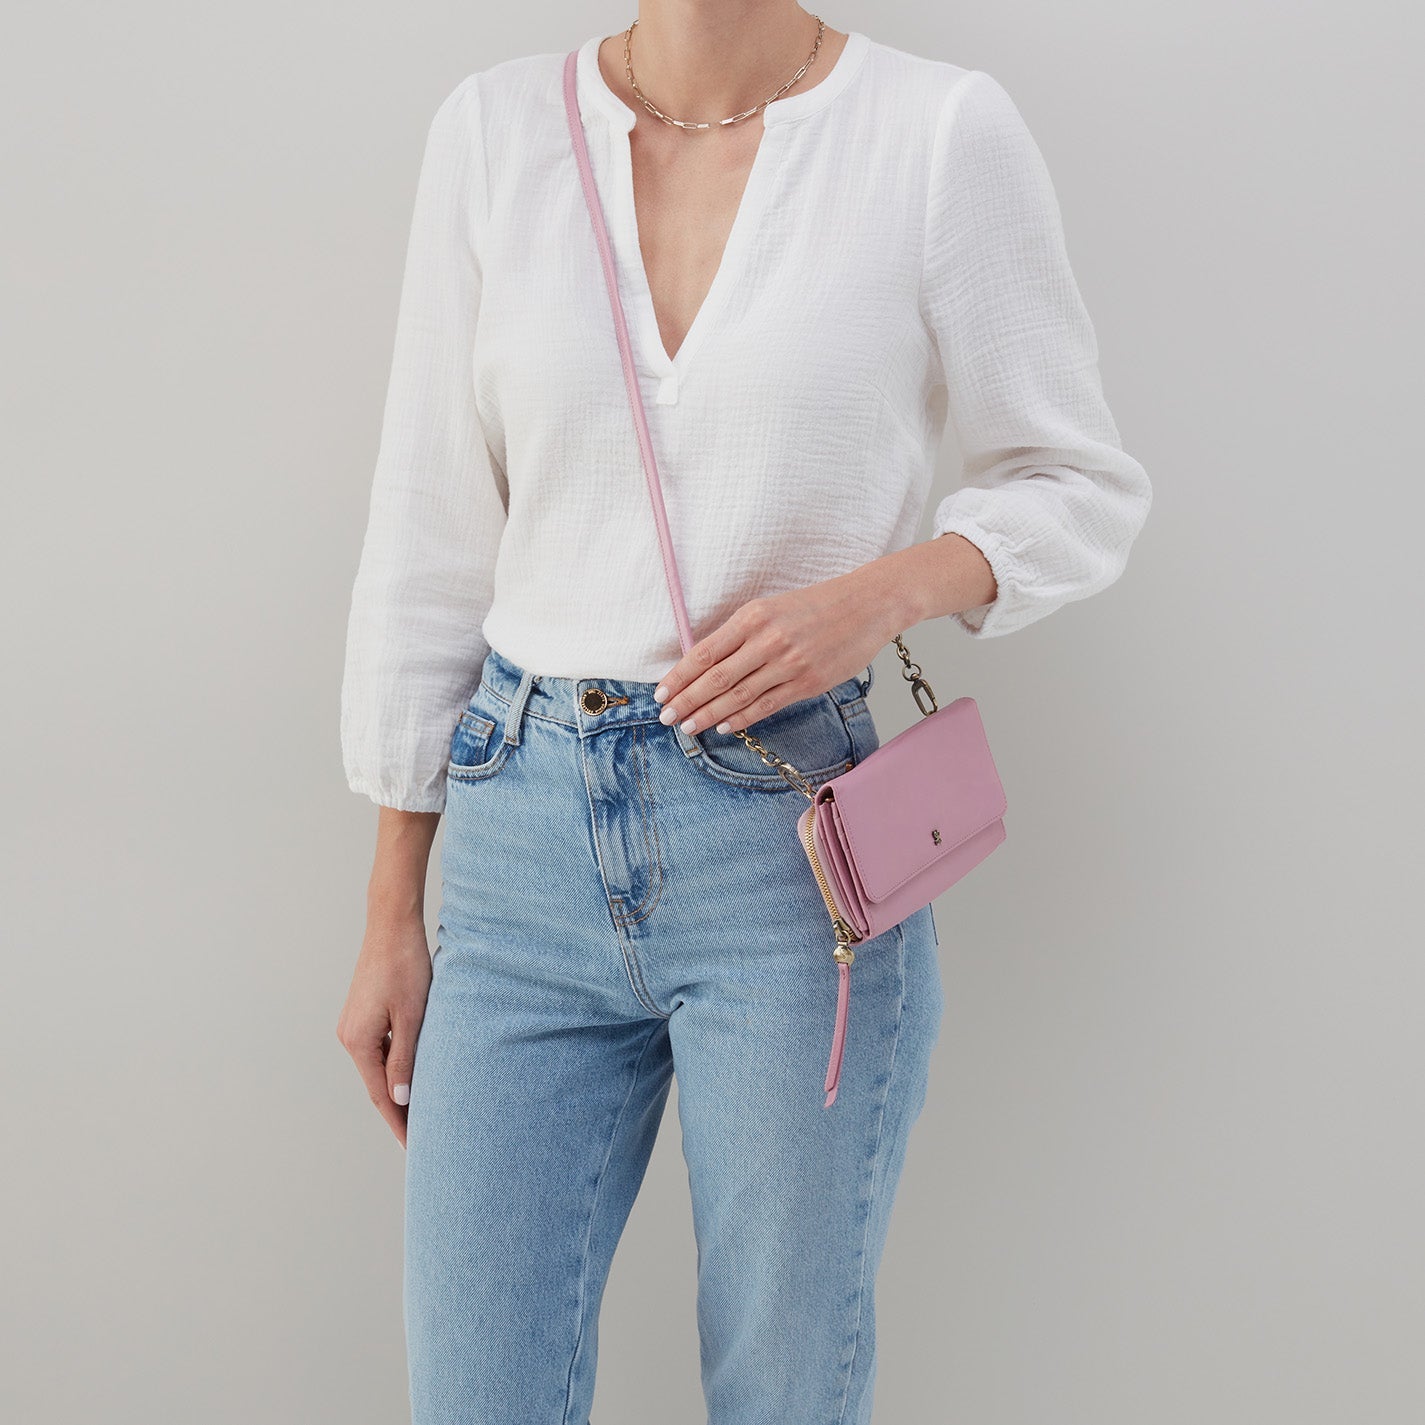 woman wearing jeans and a white blouse with a lilac rose rubie crossbody over her shoulder.